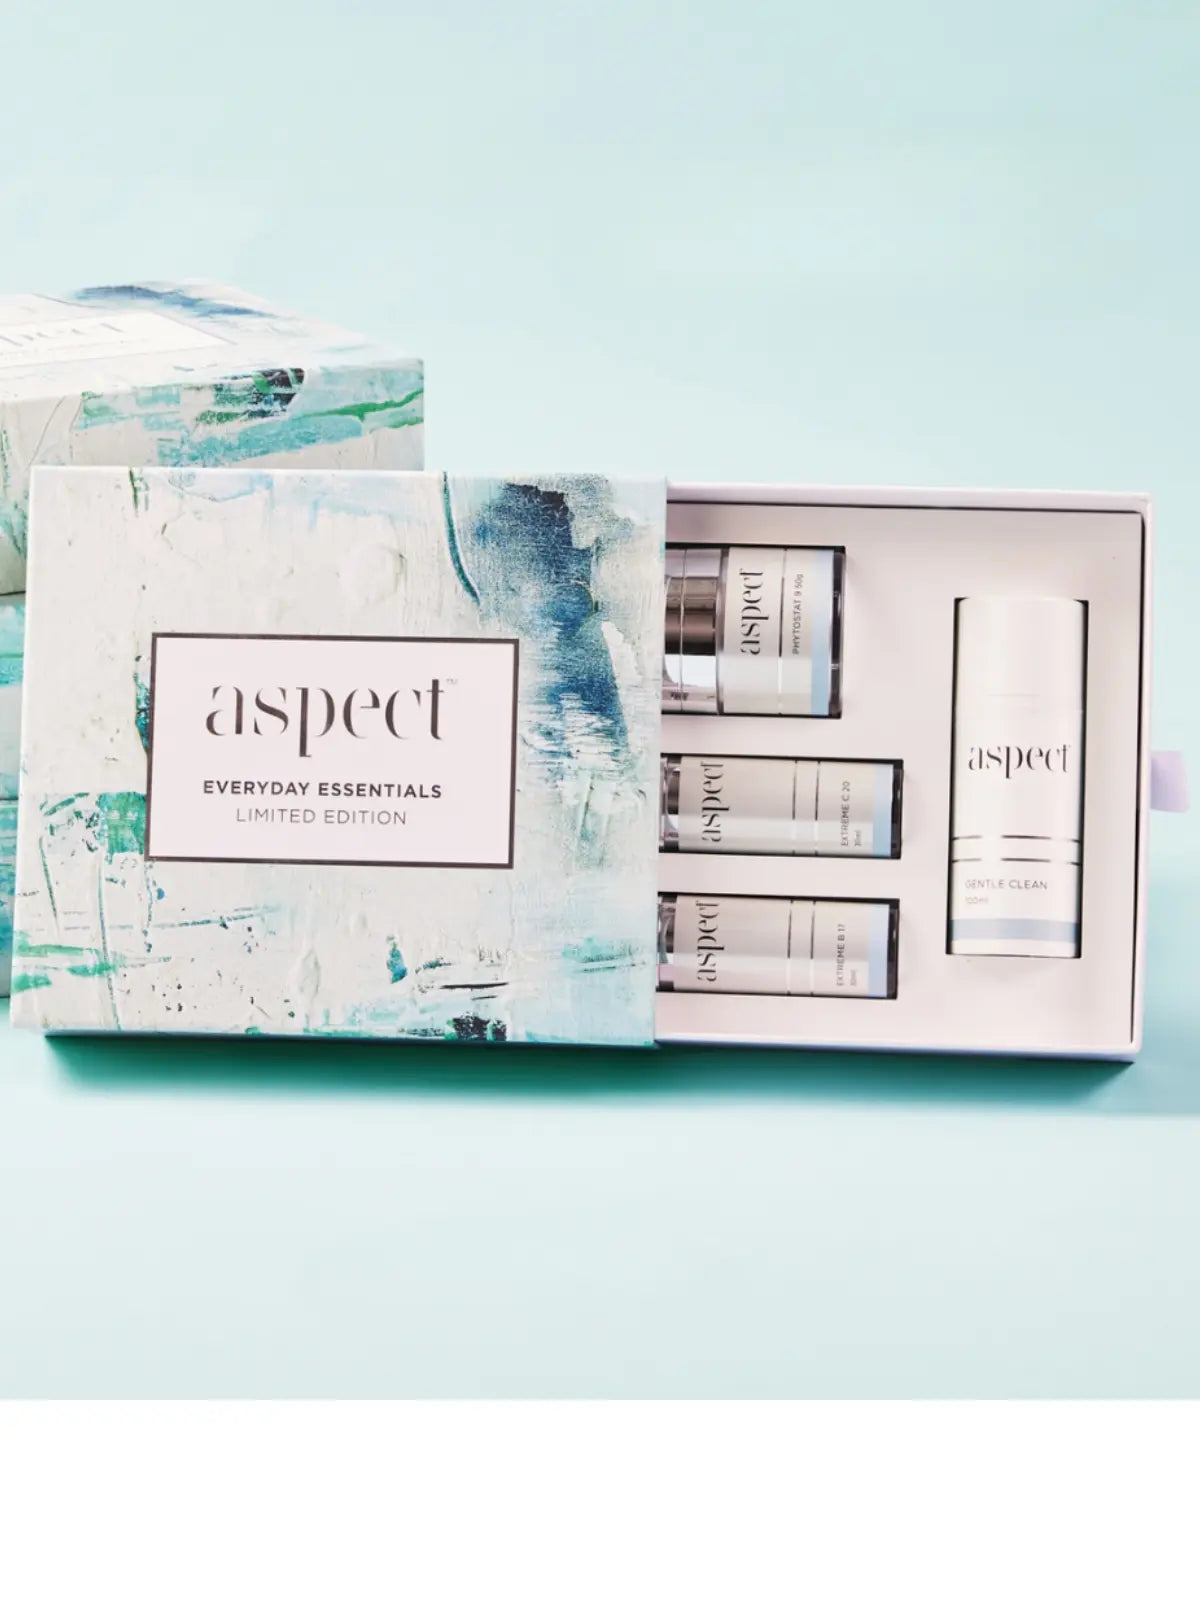 Aspect Everyday Essentials Limited Edition